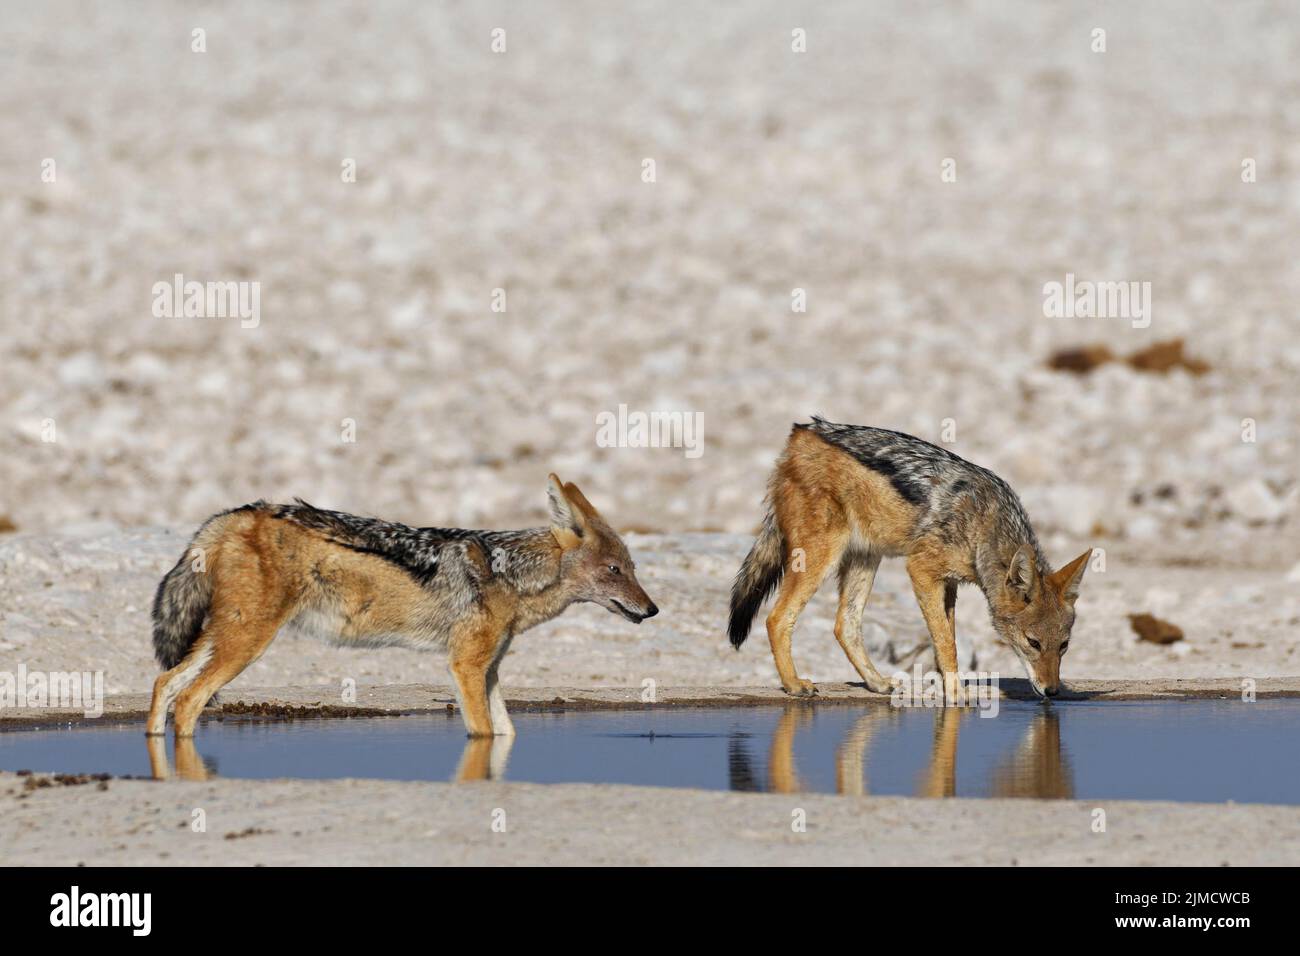 Black-backed jackals (Canis mesomelas), two adults at waterhole, one drinking, the other in water, alert, Etosha National Park, Namibia, Africa Stock Photo